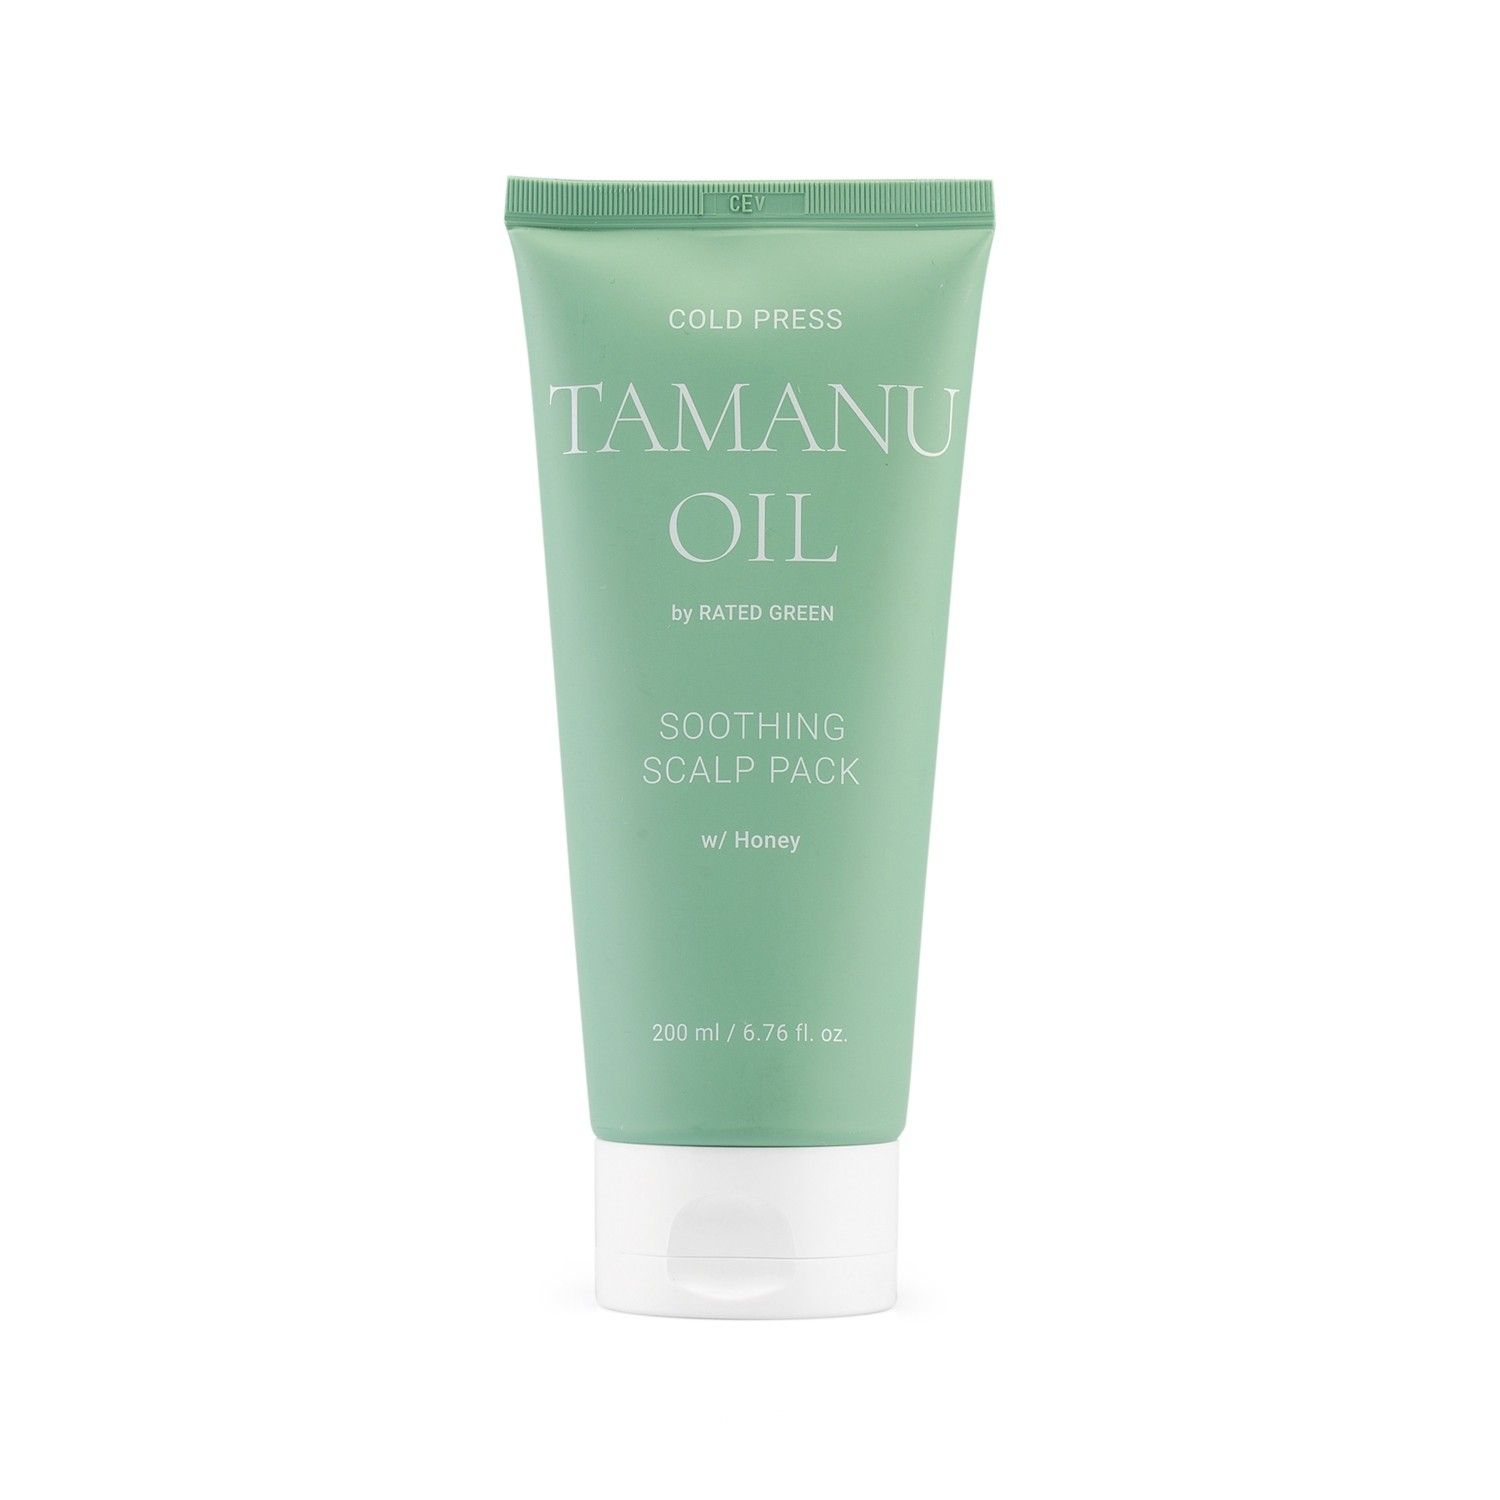 RATED GREEN Cold Press Tamanu Oil Soothing Scalp Pack 200 ml.